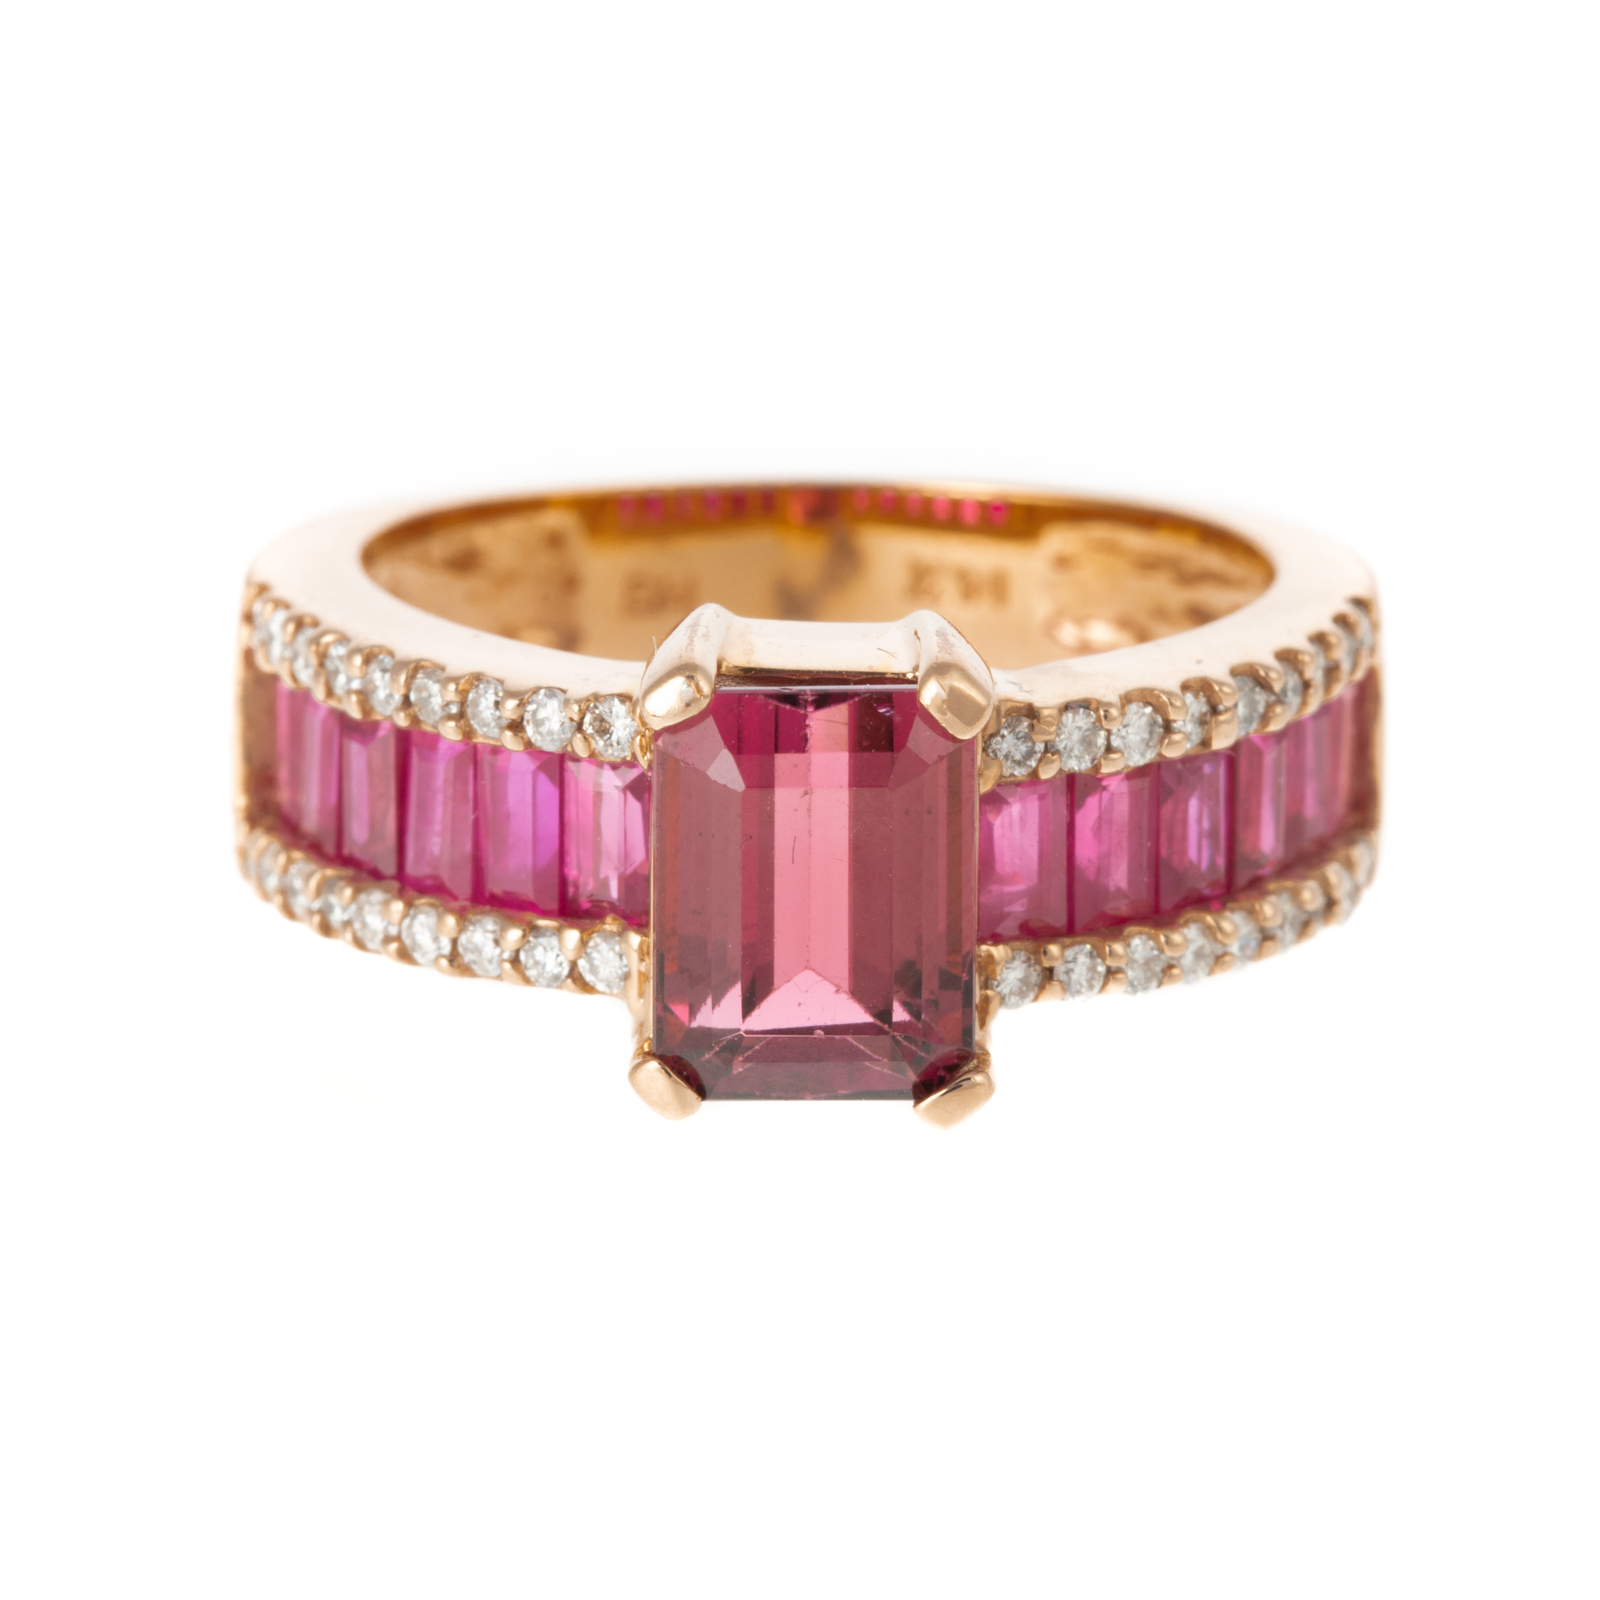 A PINK TOURMALINE RUBY RING IN 3386cc